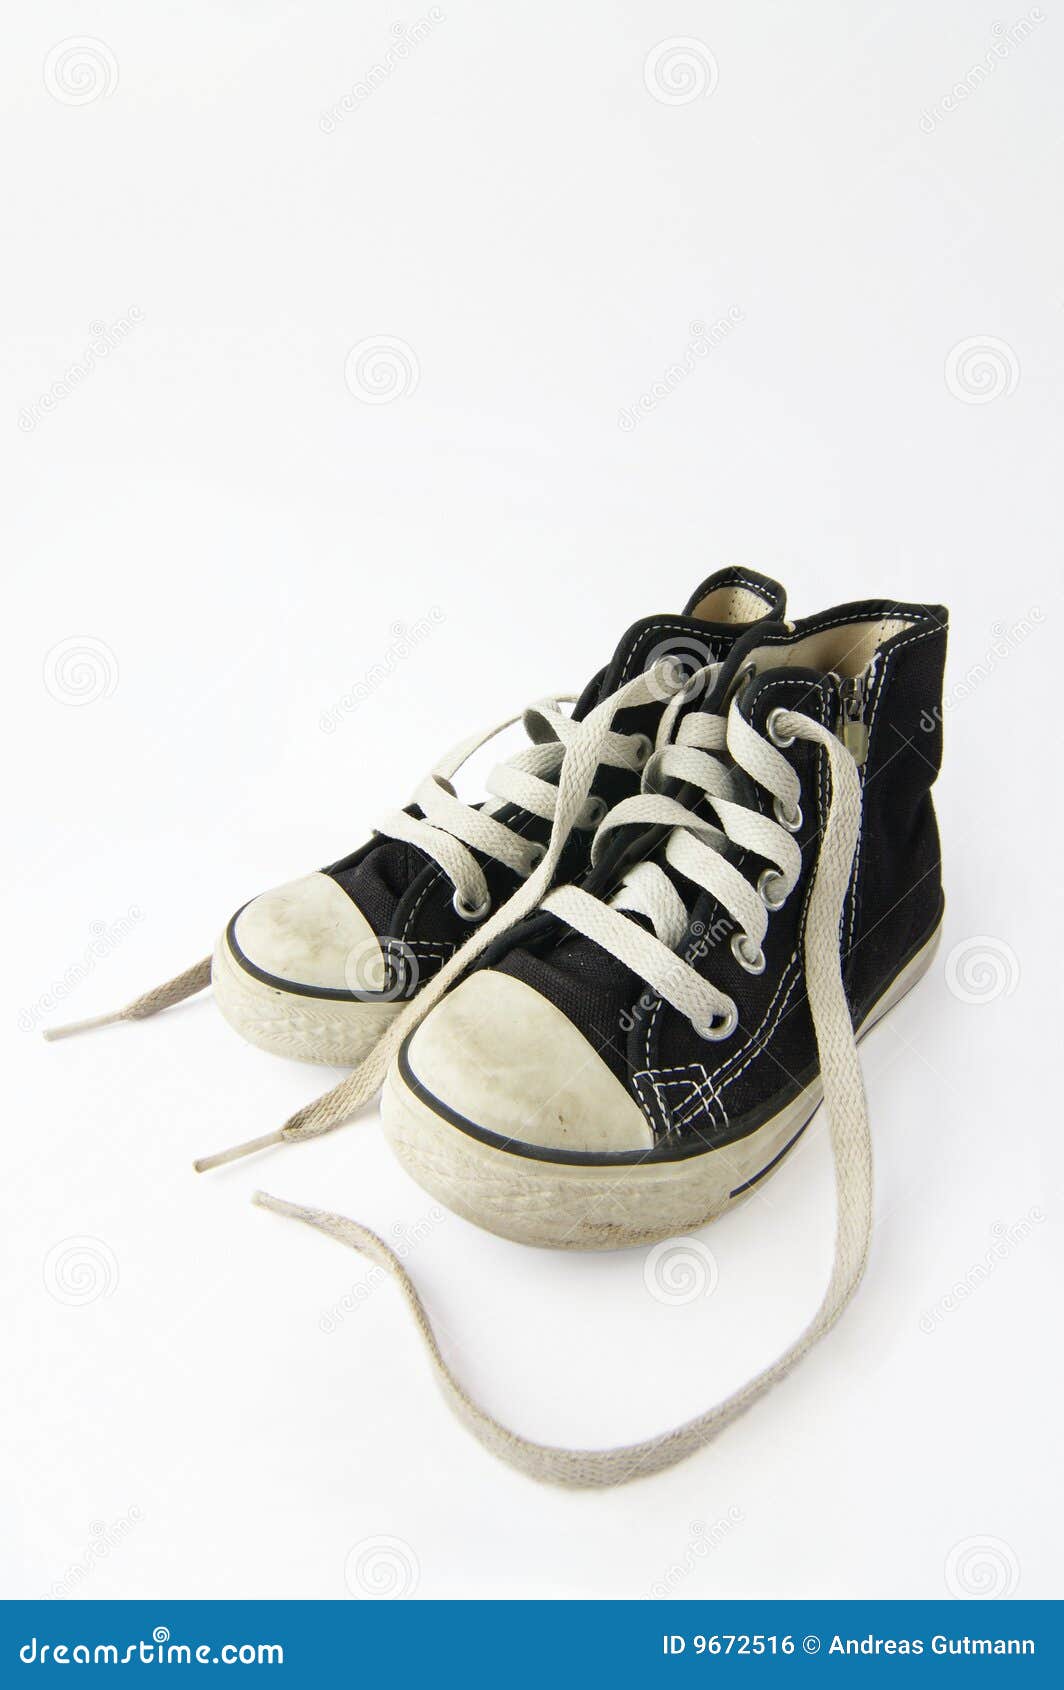 A pair of children s shoe stock photo. Image of child - 9672516